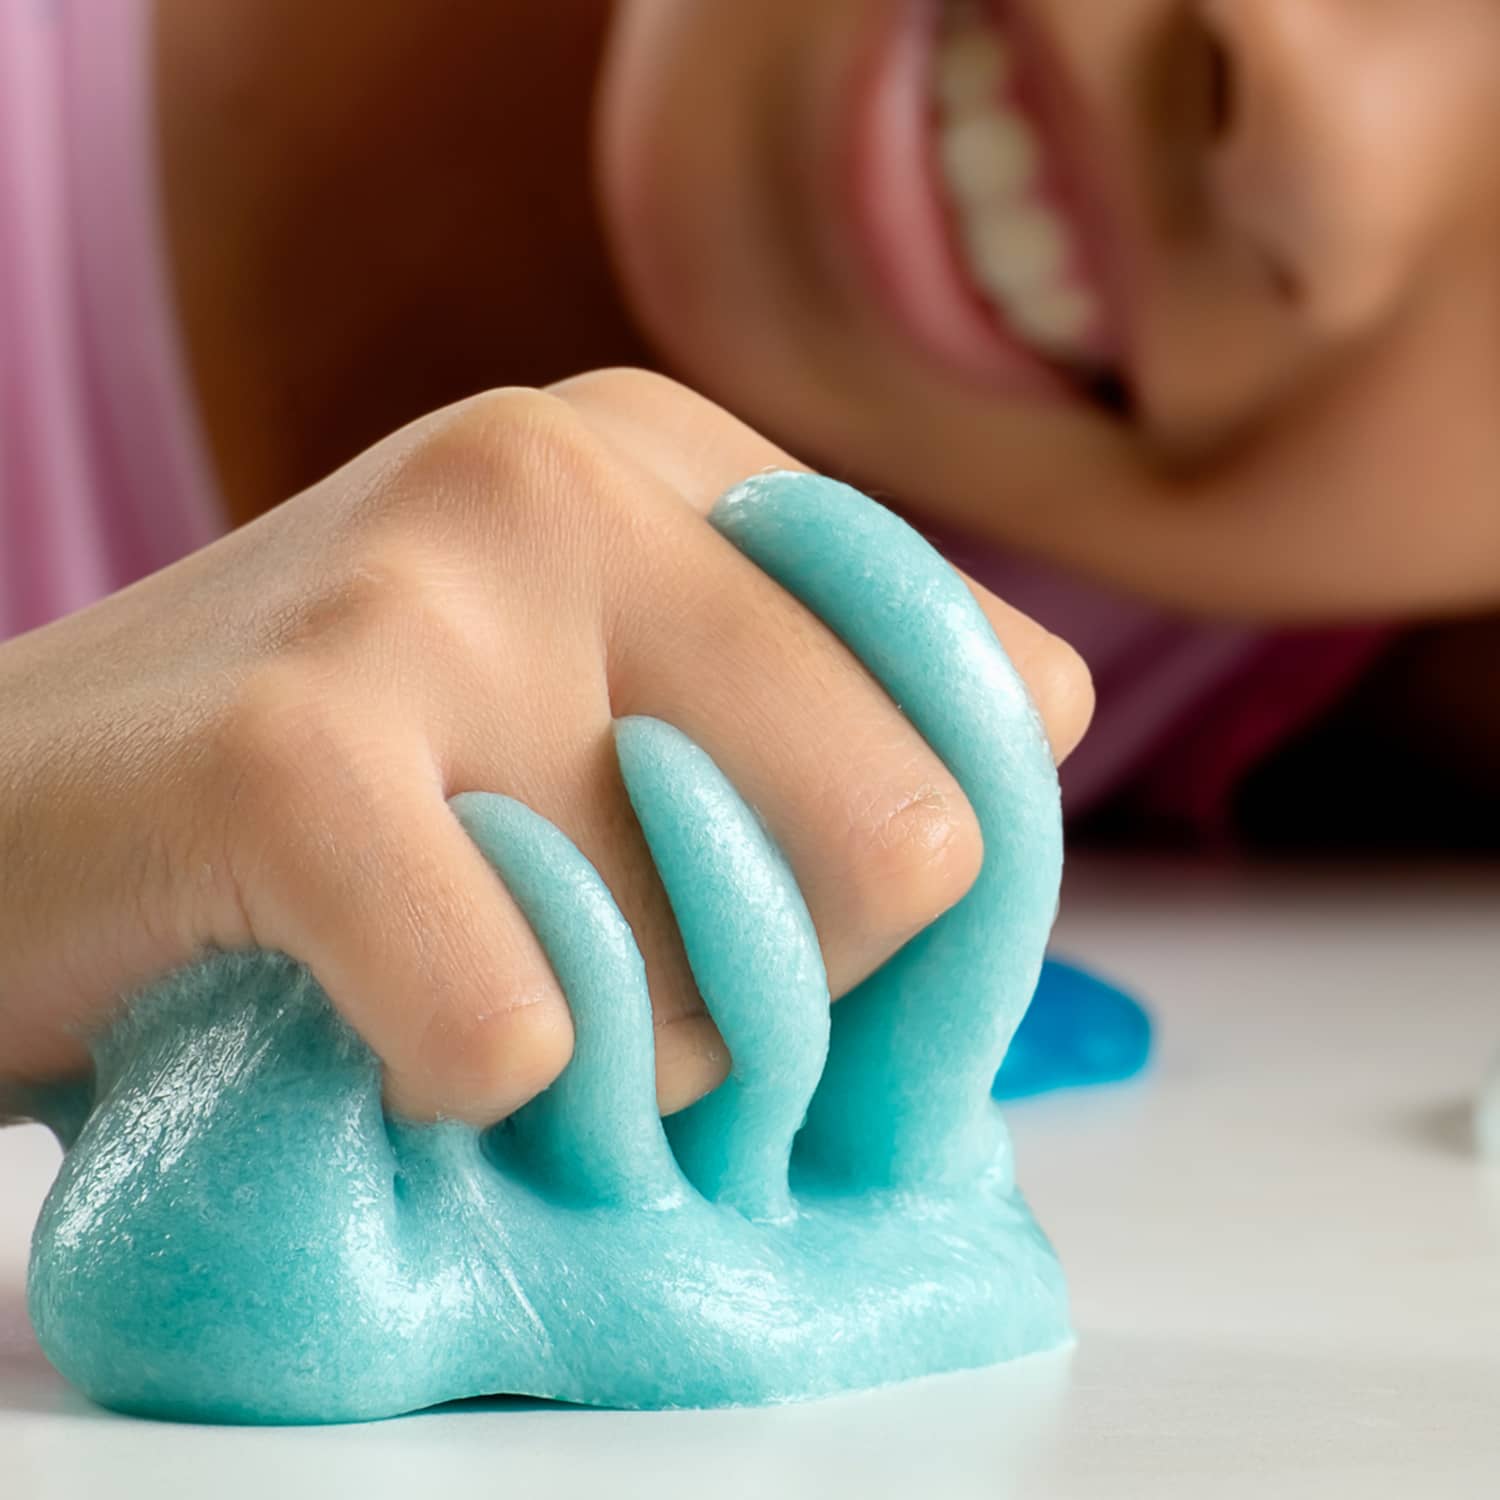 This Slime Will Clean All Of The Hard To Reach Dust In Your Car